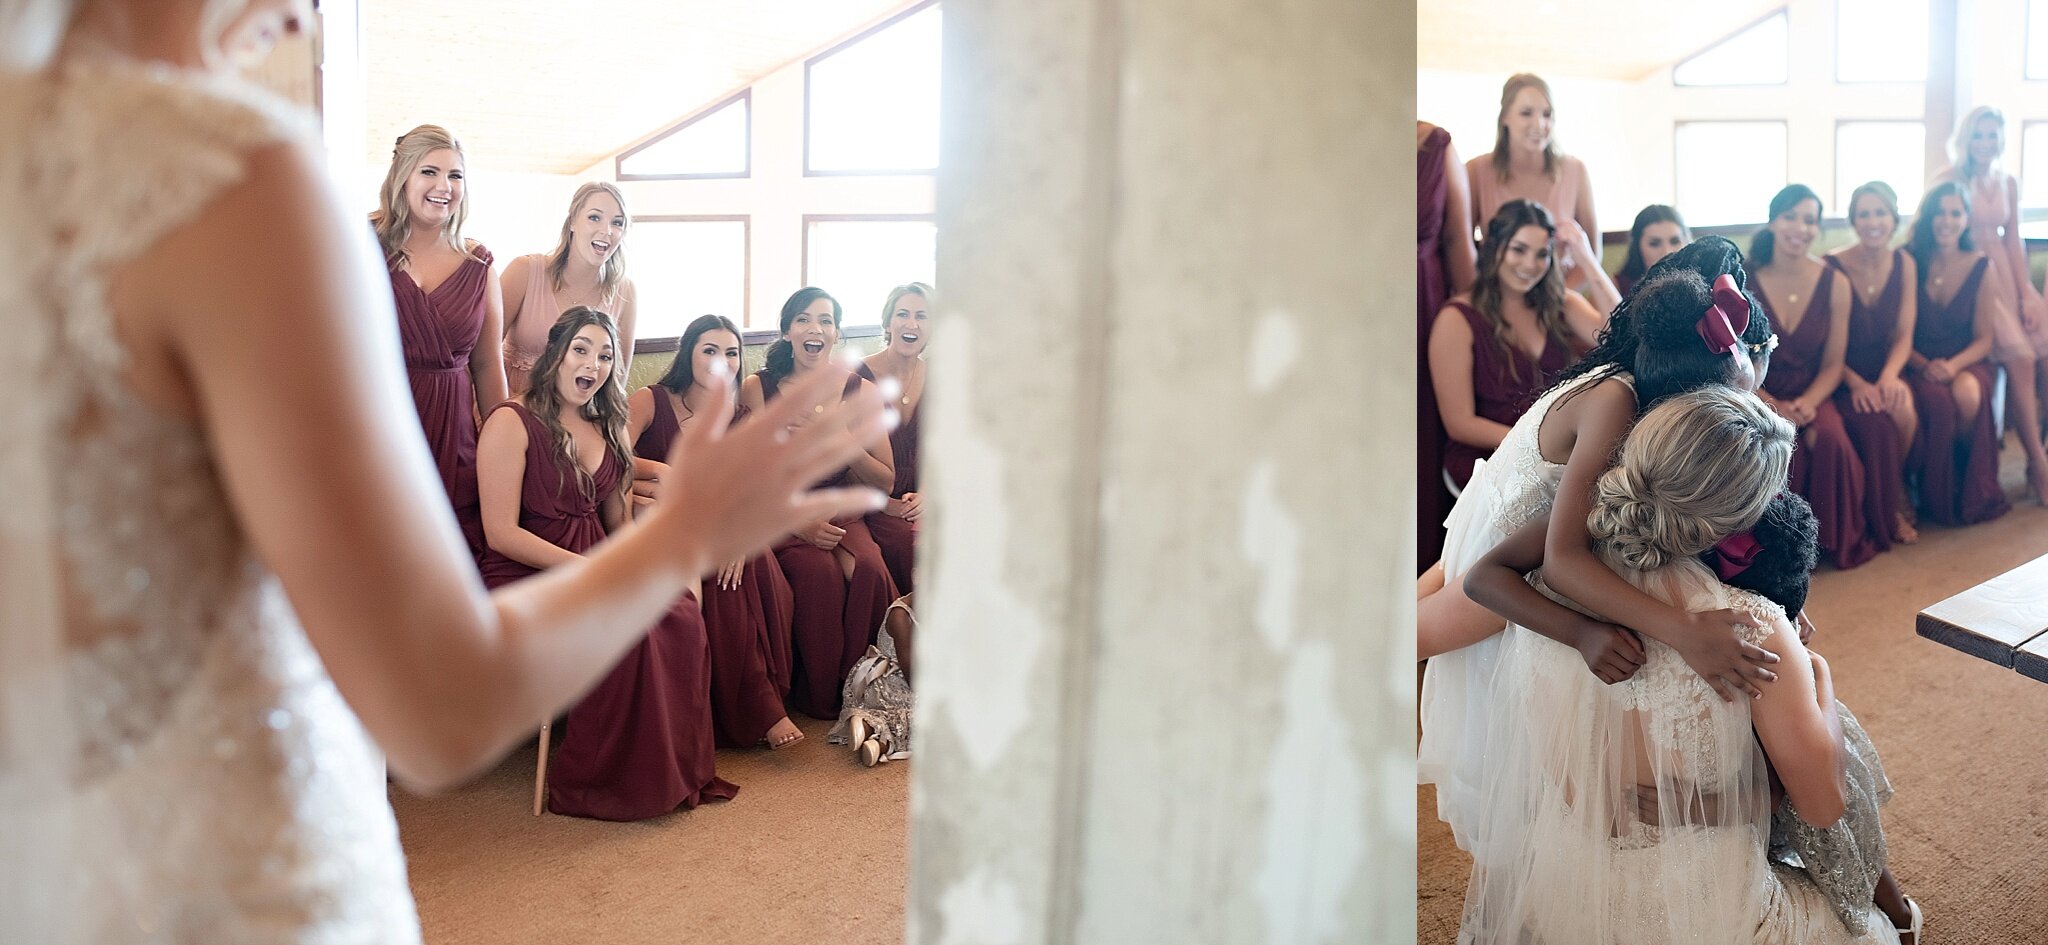 bride shows bridesmaids her final look on her wedding day